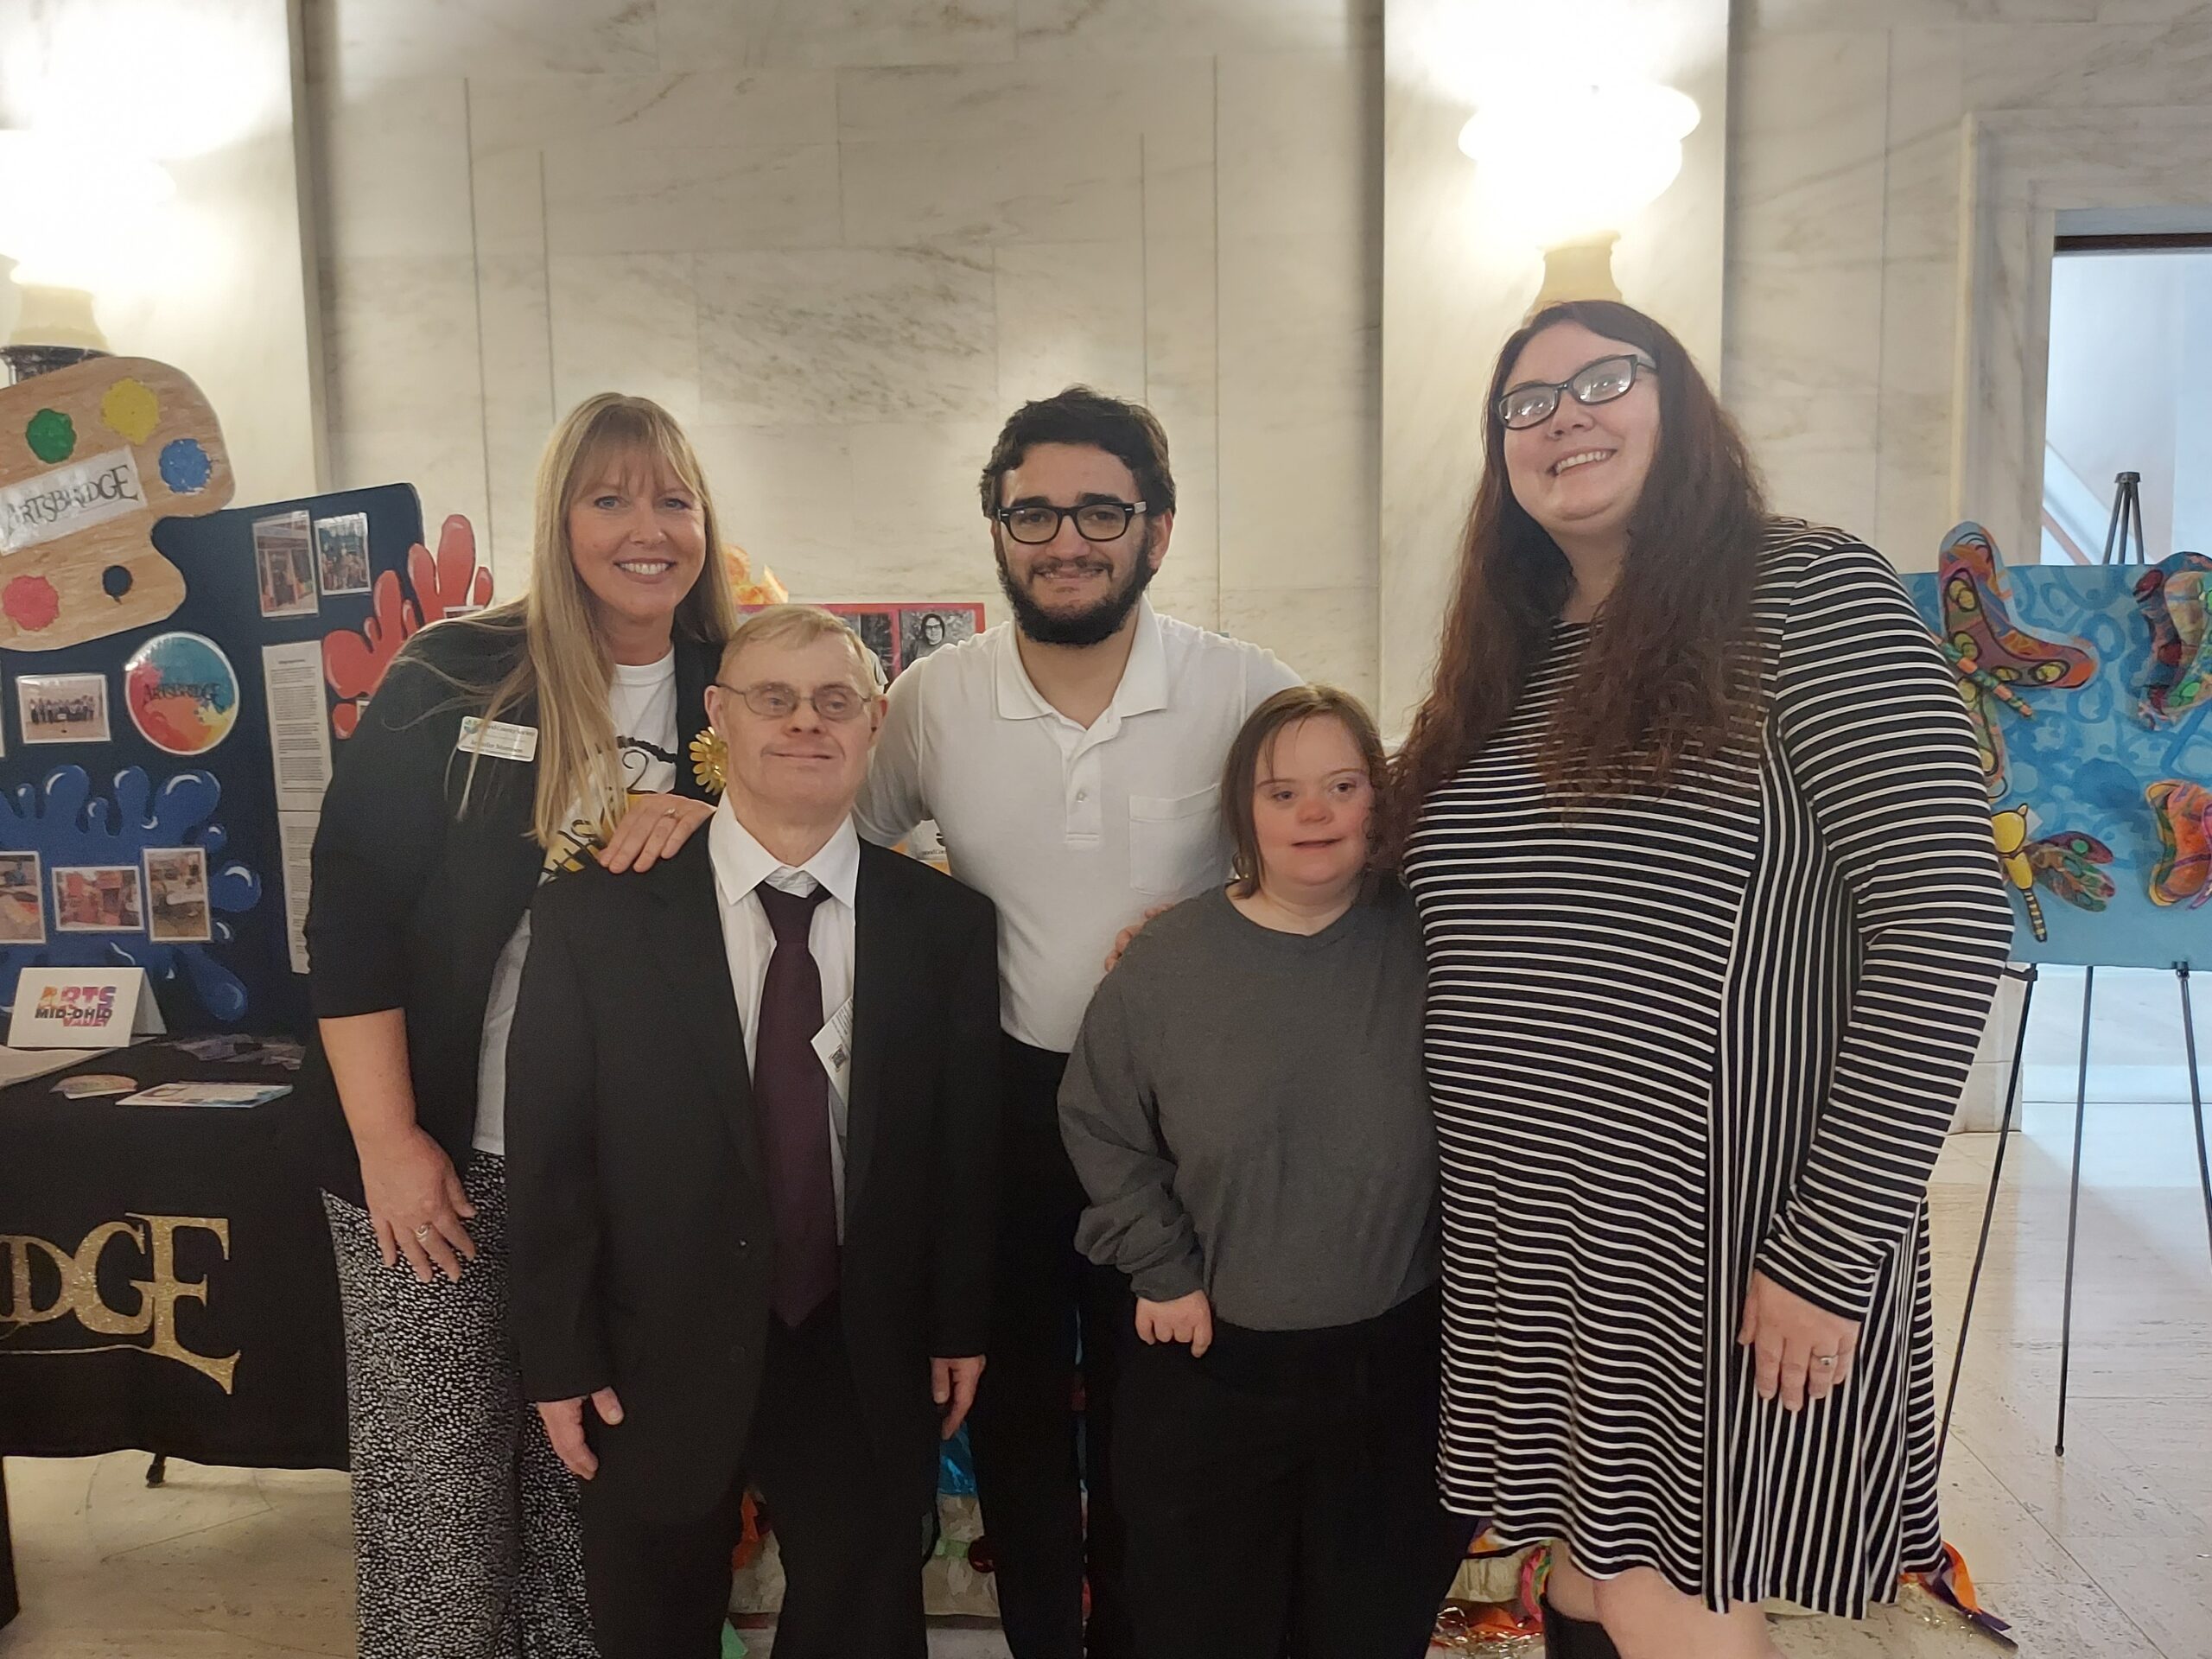 Parkersburg-based art studio allowing people with disabilities to express themselves – WV MetroNews